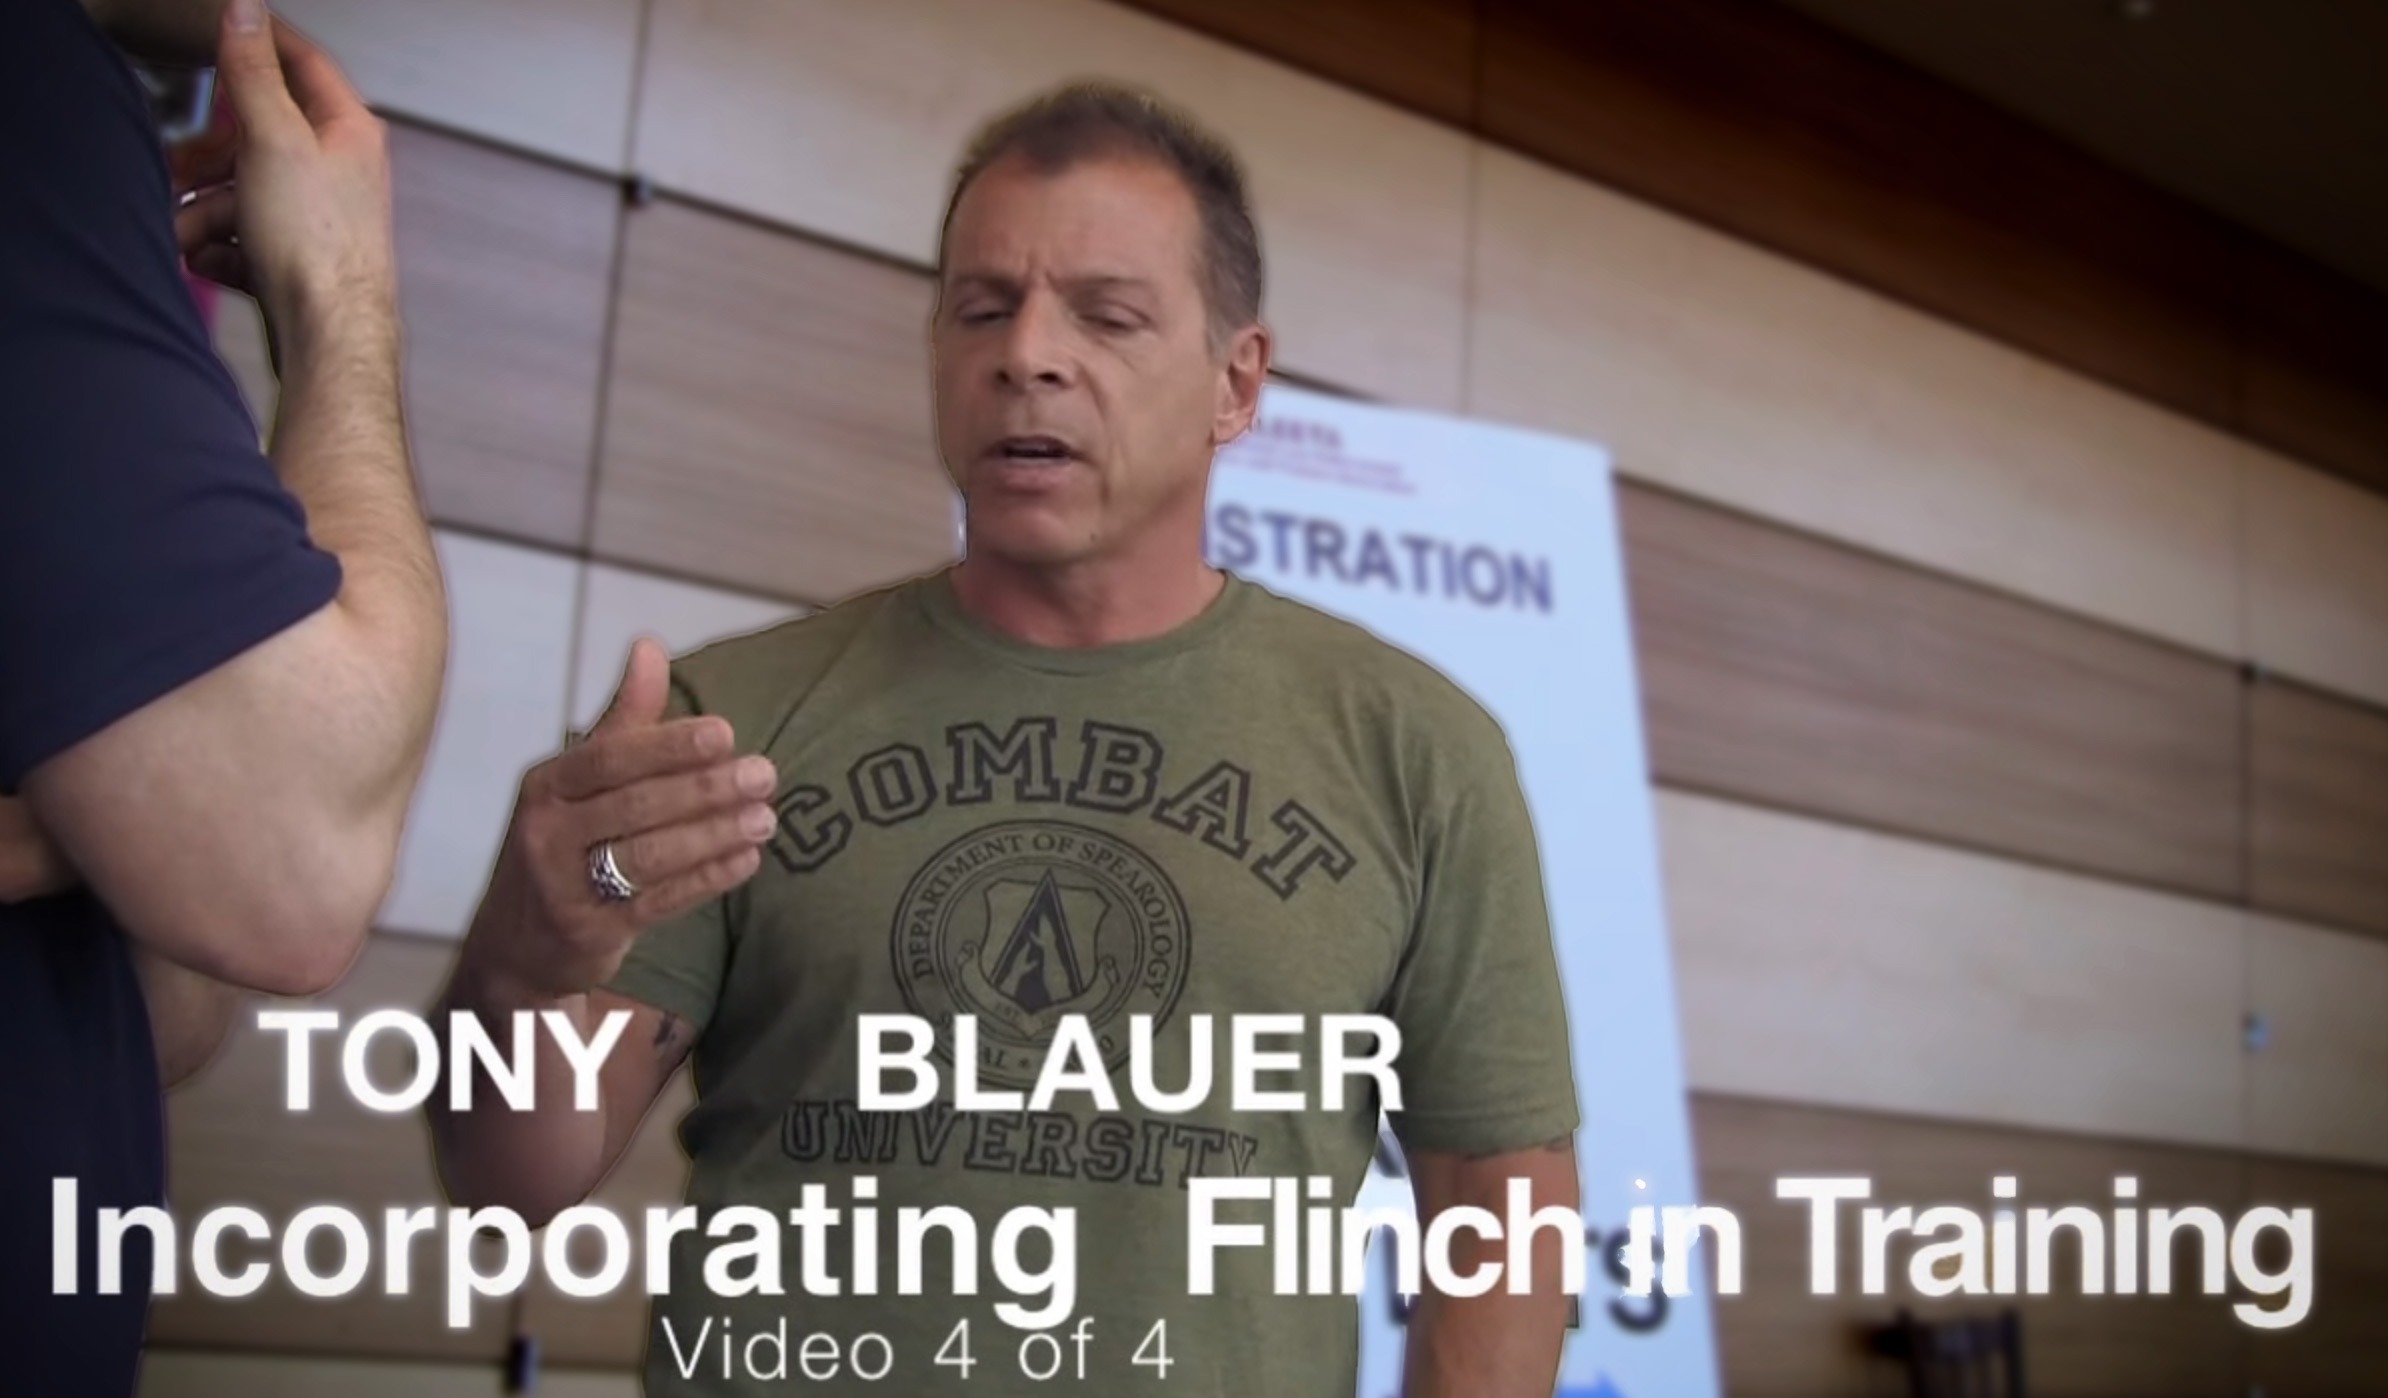 Tony Discussing Incorporating Flinch into Practical Daily Training